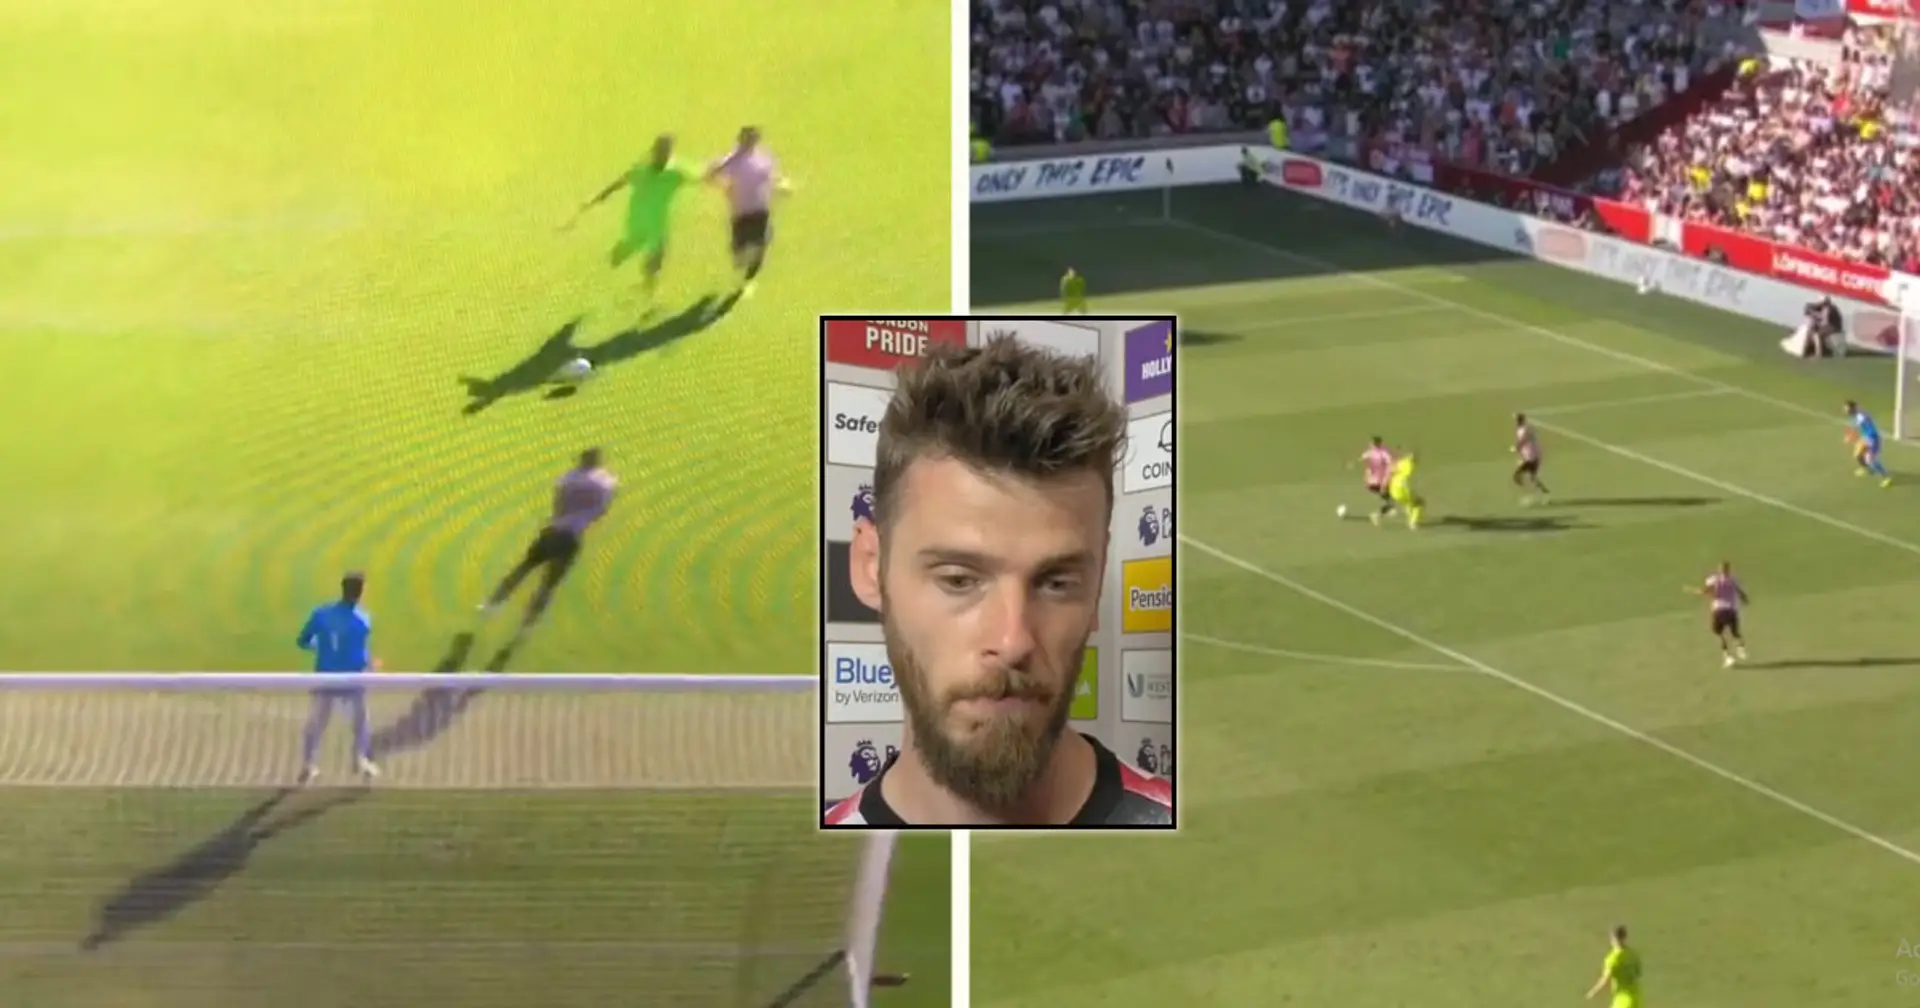 Spotted: De Gea sets Eriksen up for inevitable failure with poorest distribution